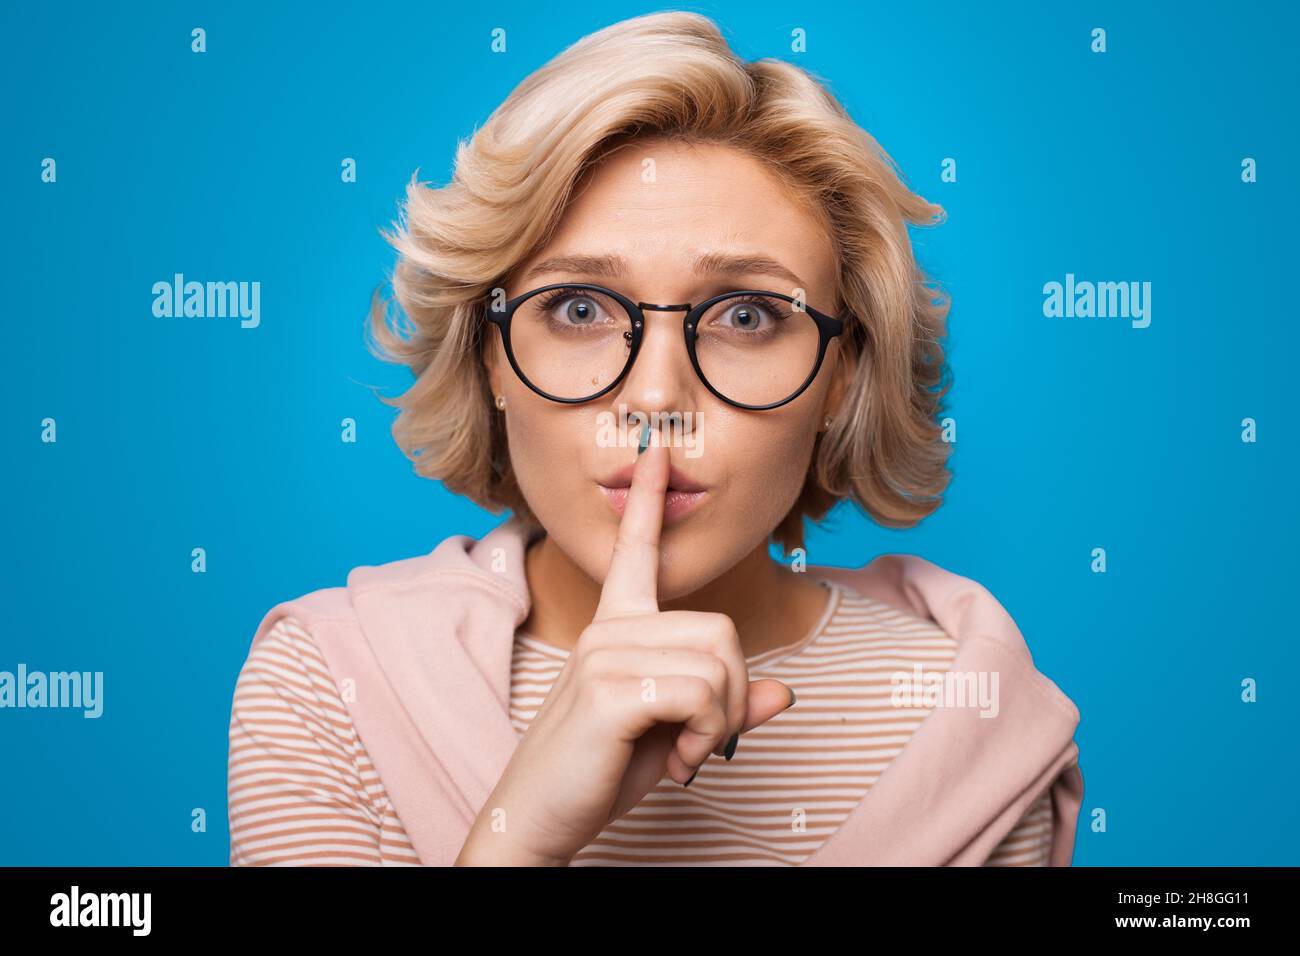 Surprised blonde haired woman makes silence gesture presses index finger over lips isolated over blue background. Shhh sign. Stock Photo